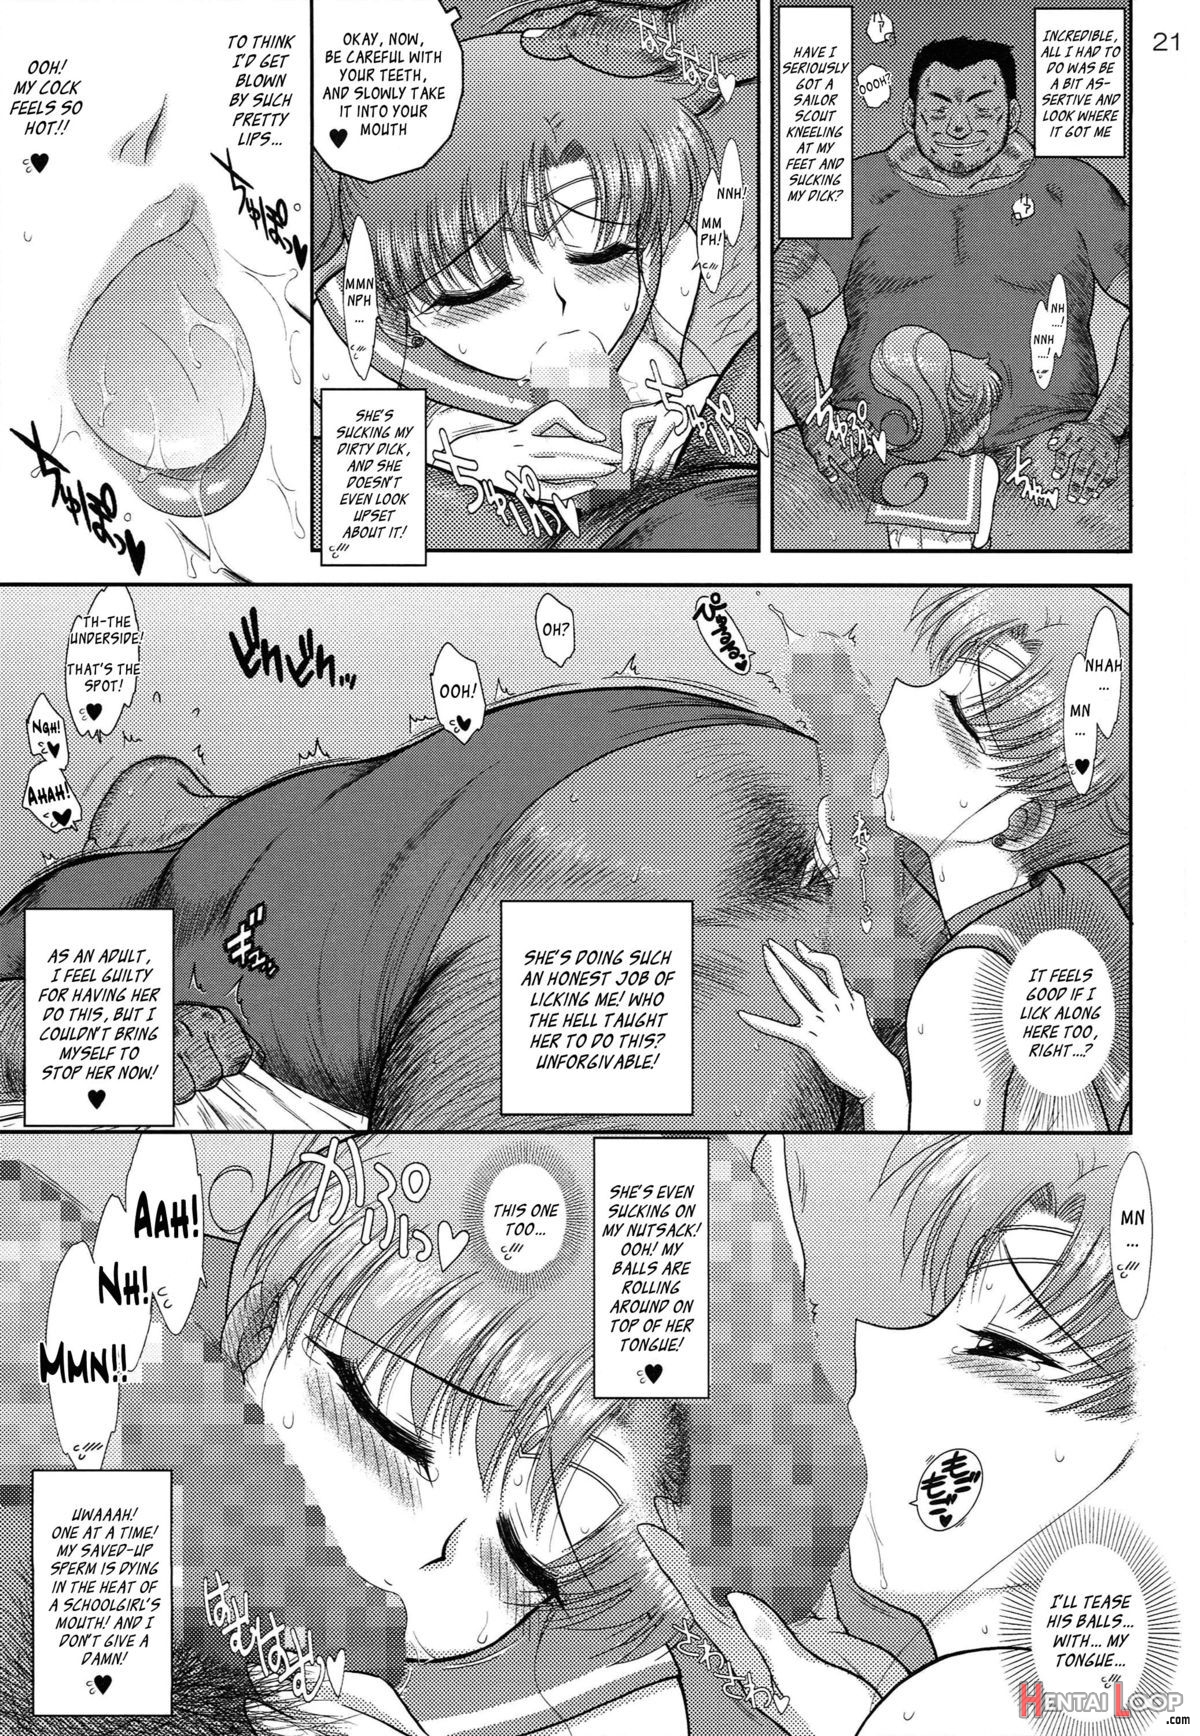 Made In Heavencomplete Edition page 21